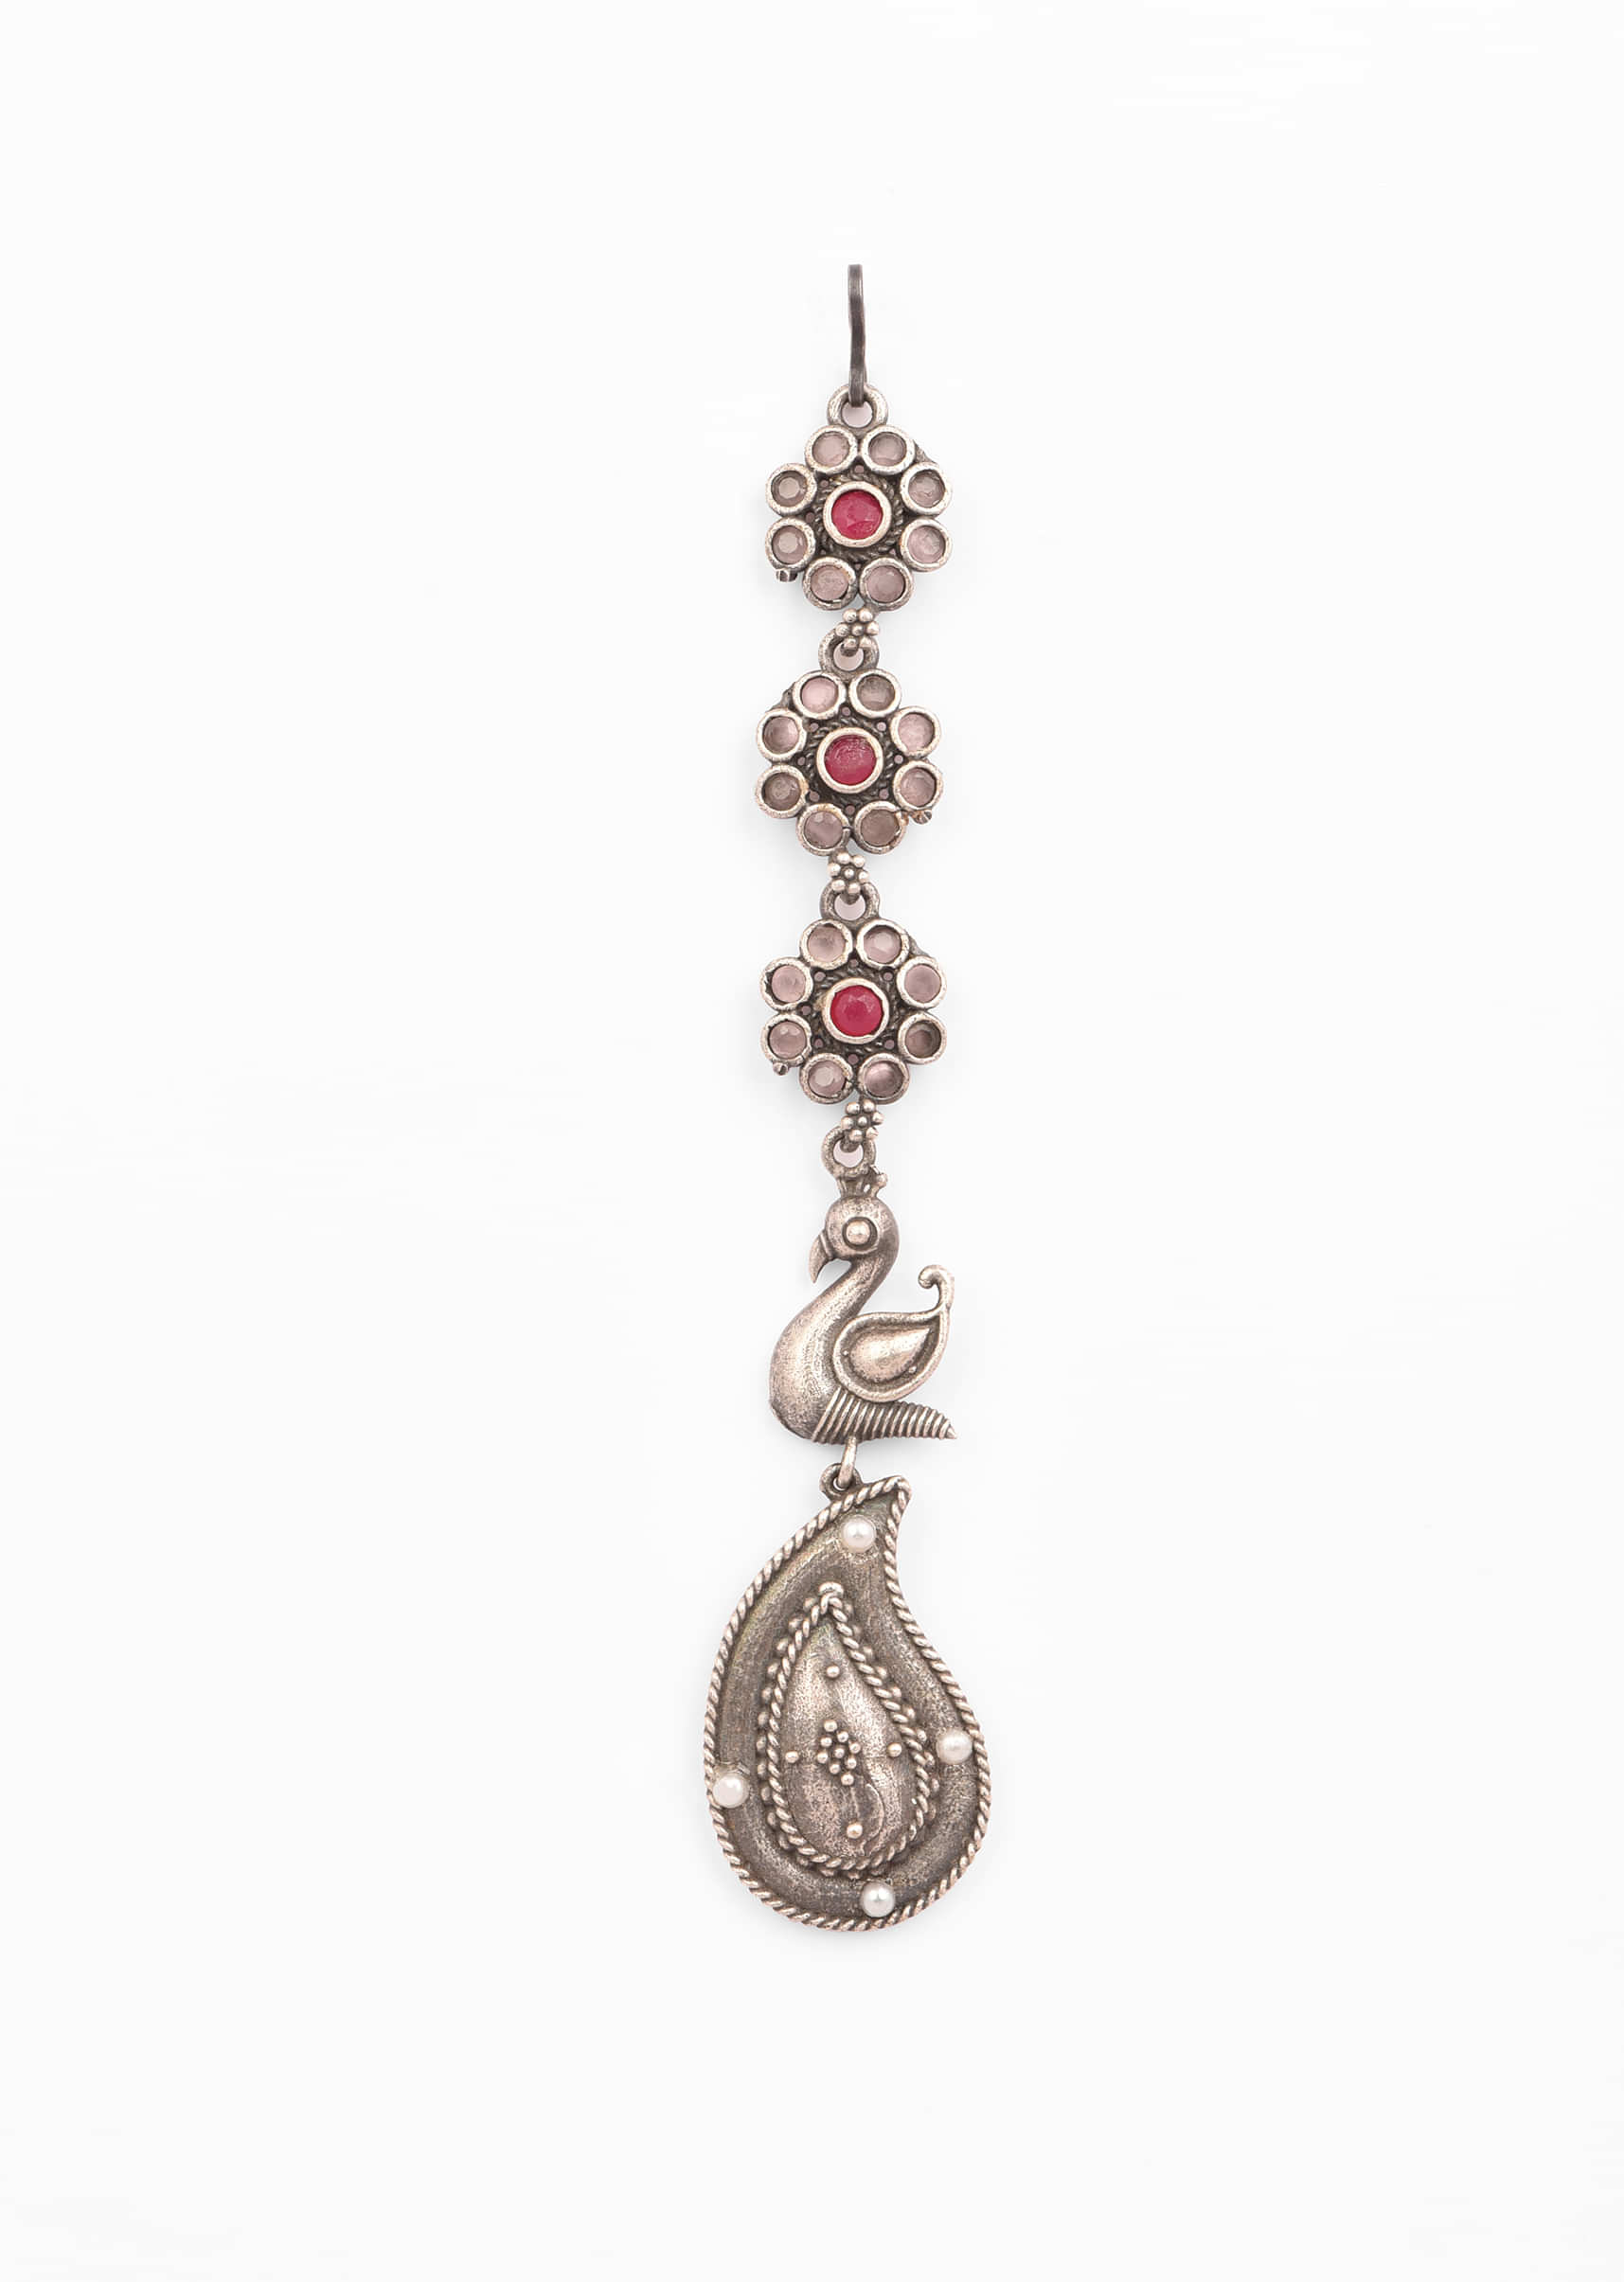 Oxidised Silver Mangtika With Carved Paisley Motif Studded In Pink And Lavender Stones 